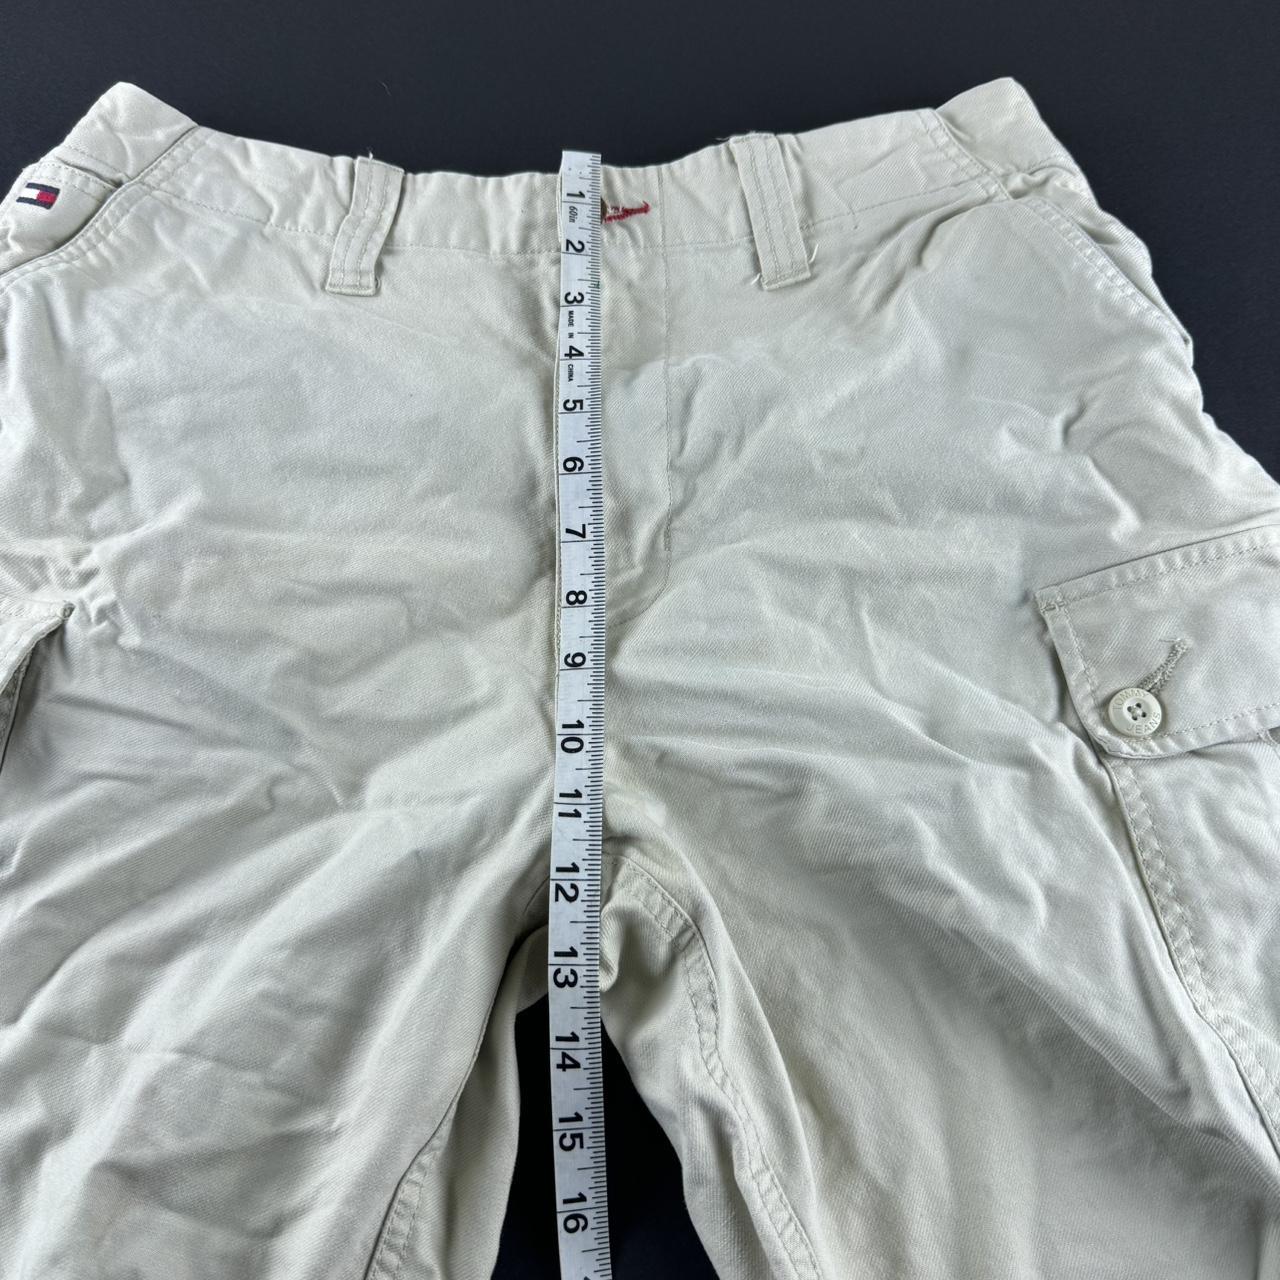 Tommy Hilfiger Men's Cream and Tan Shorts (5)